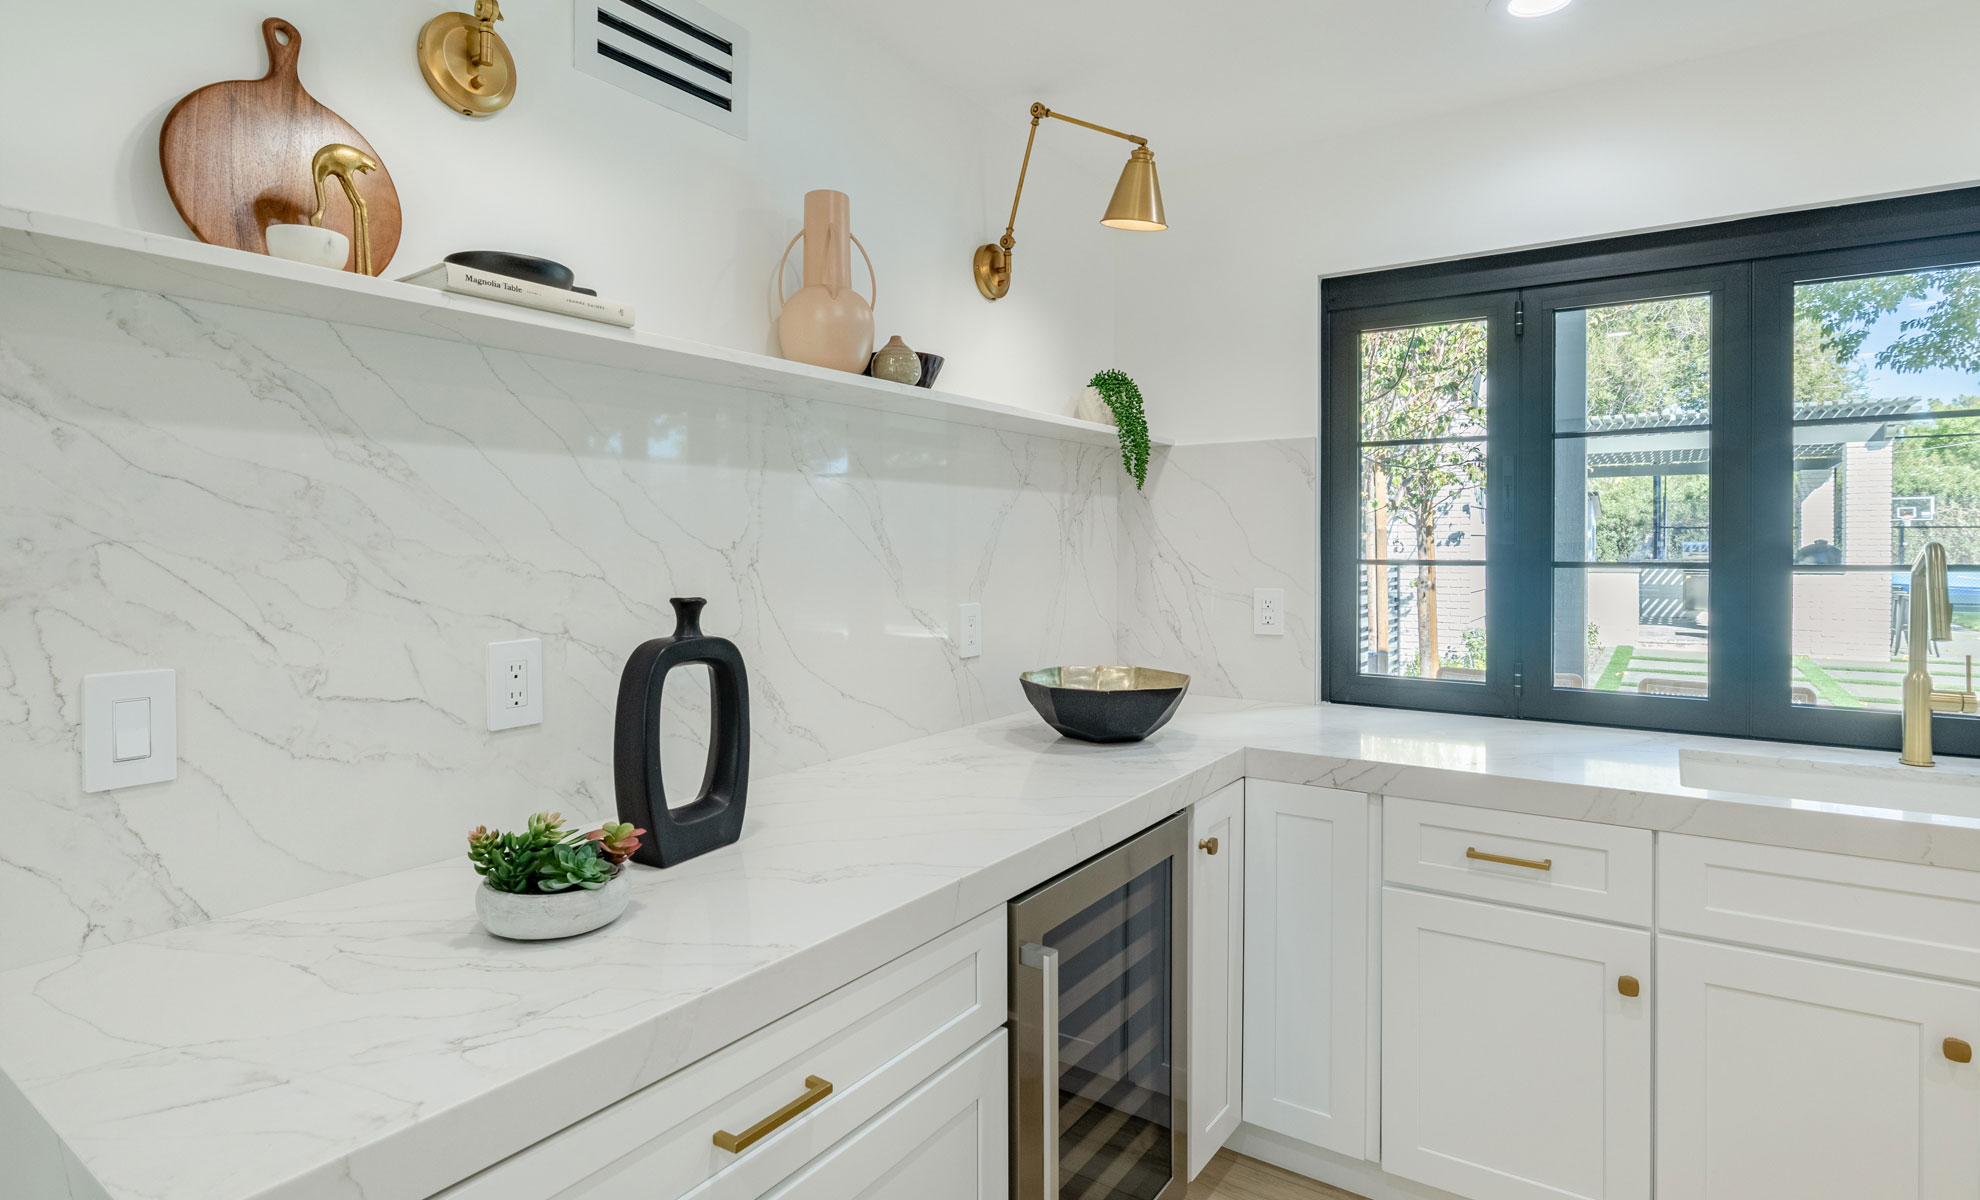 This kitchen features a white quartz countertop and backsplash with veins. A plant, a bowl and a vase are resting on the countertop. A cutting board, a book, a plant and a vase are set on a shelf above the countertop.